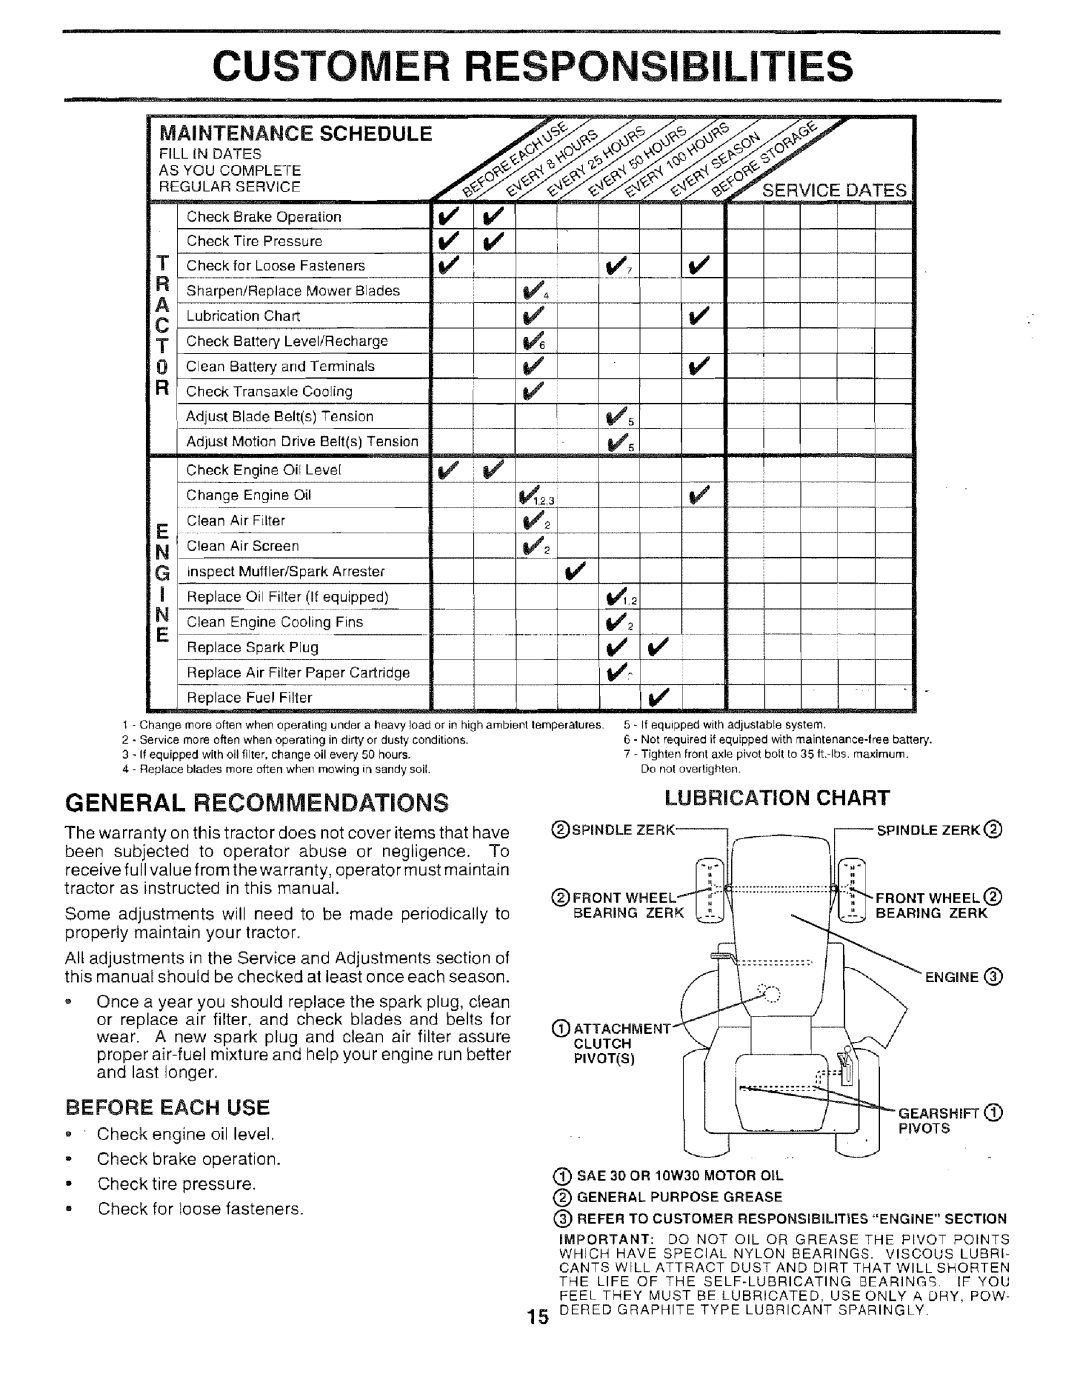 Sears 917.259567 Customer, Ibilities, General Recommendations, Schedule, Lubrication Chart, Before Each Use, Maintenance 